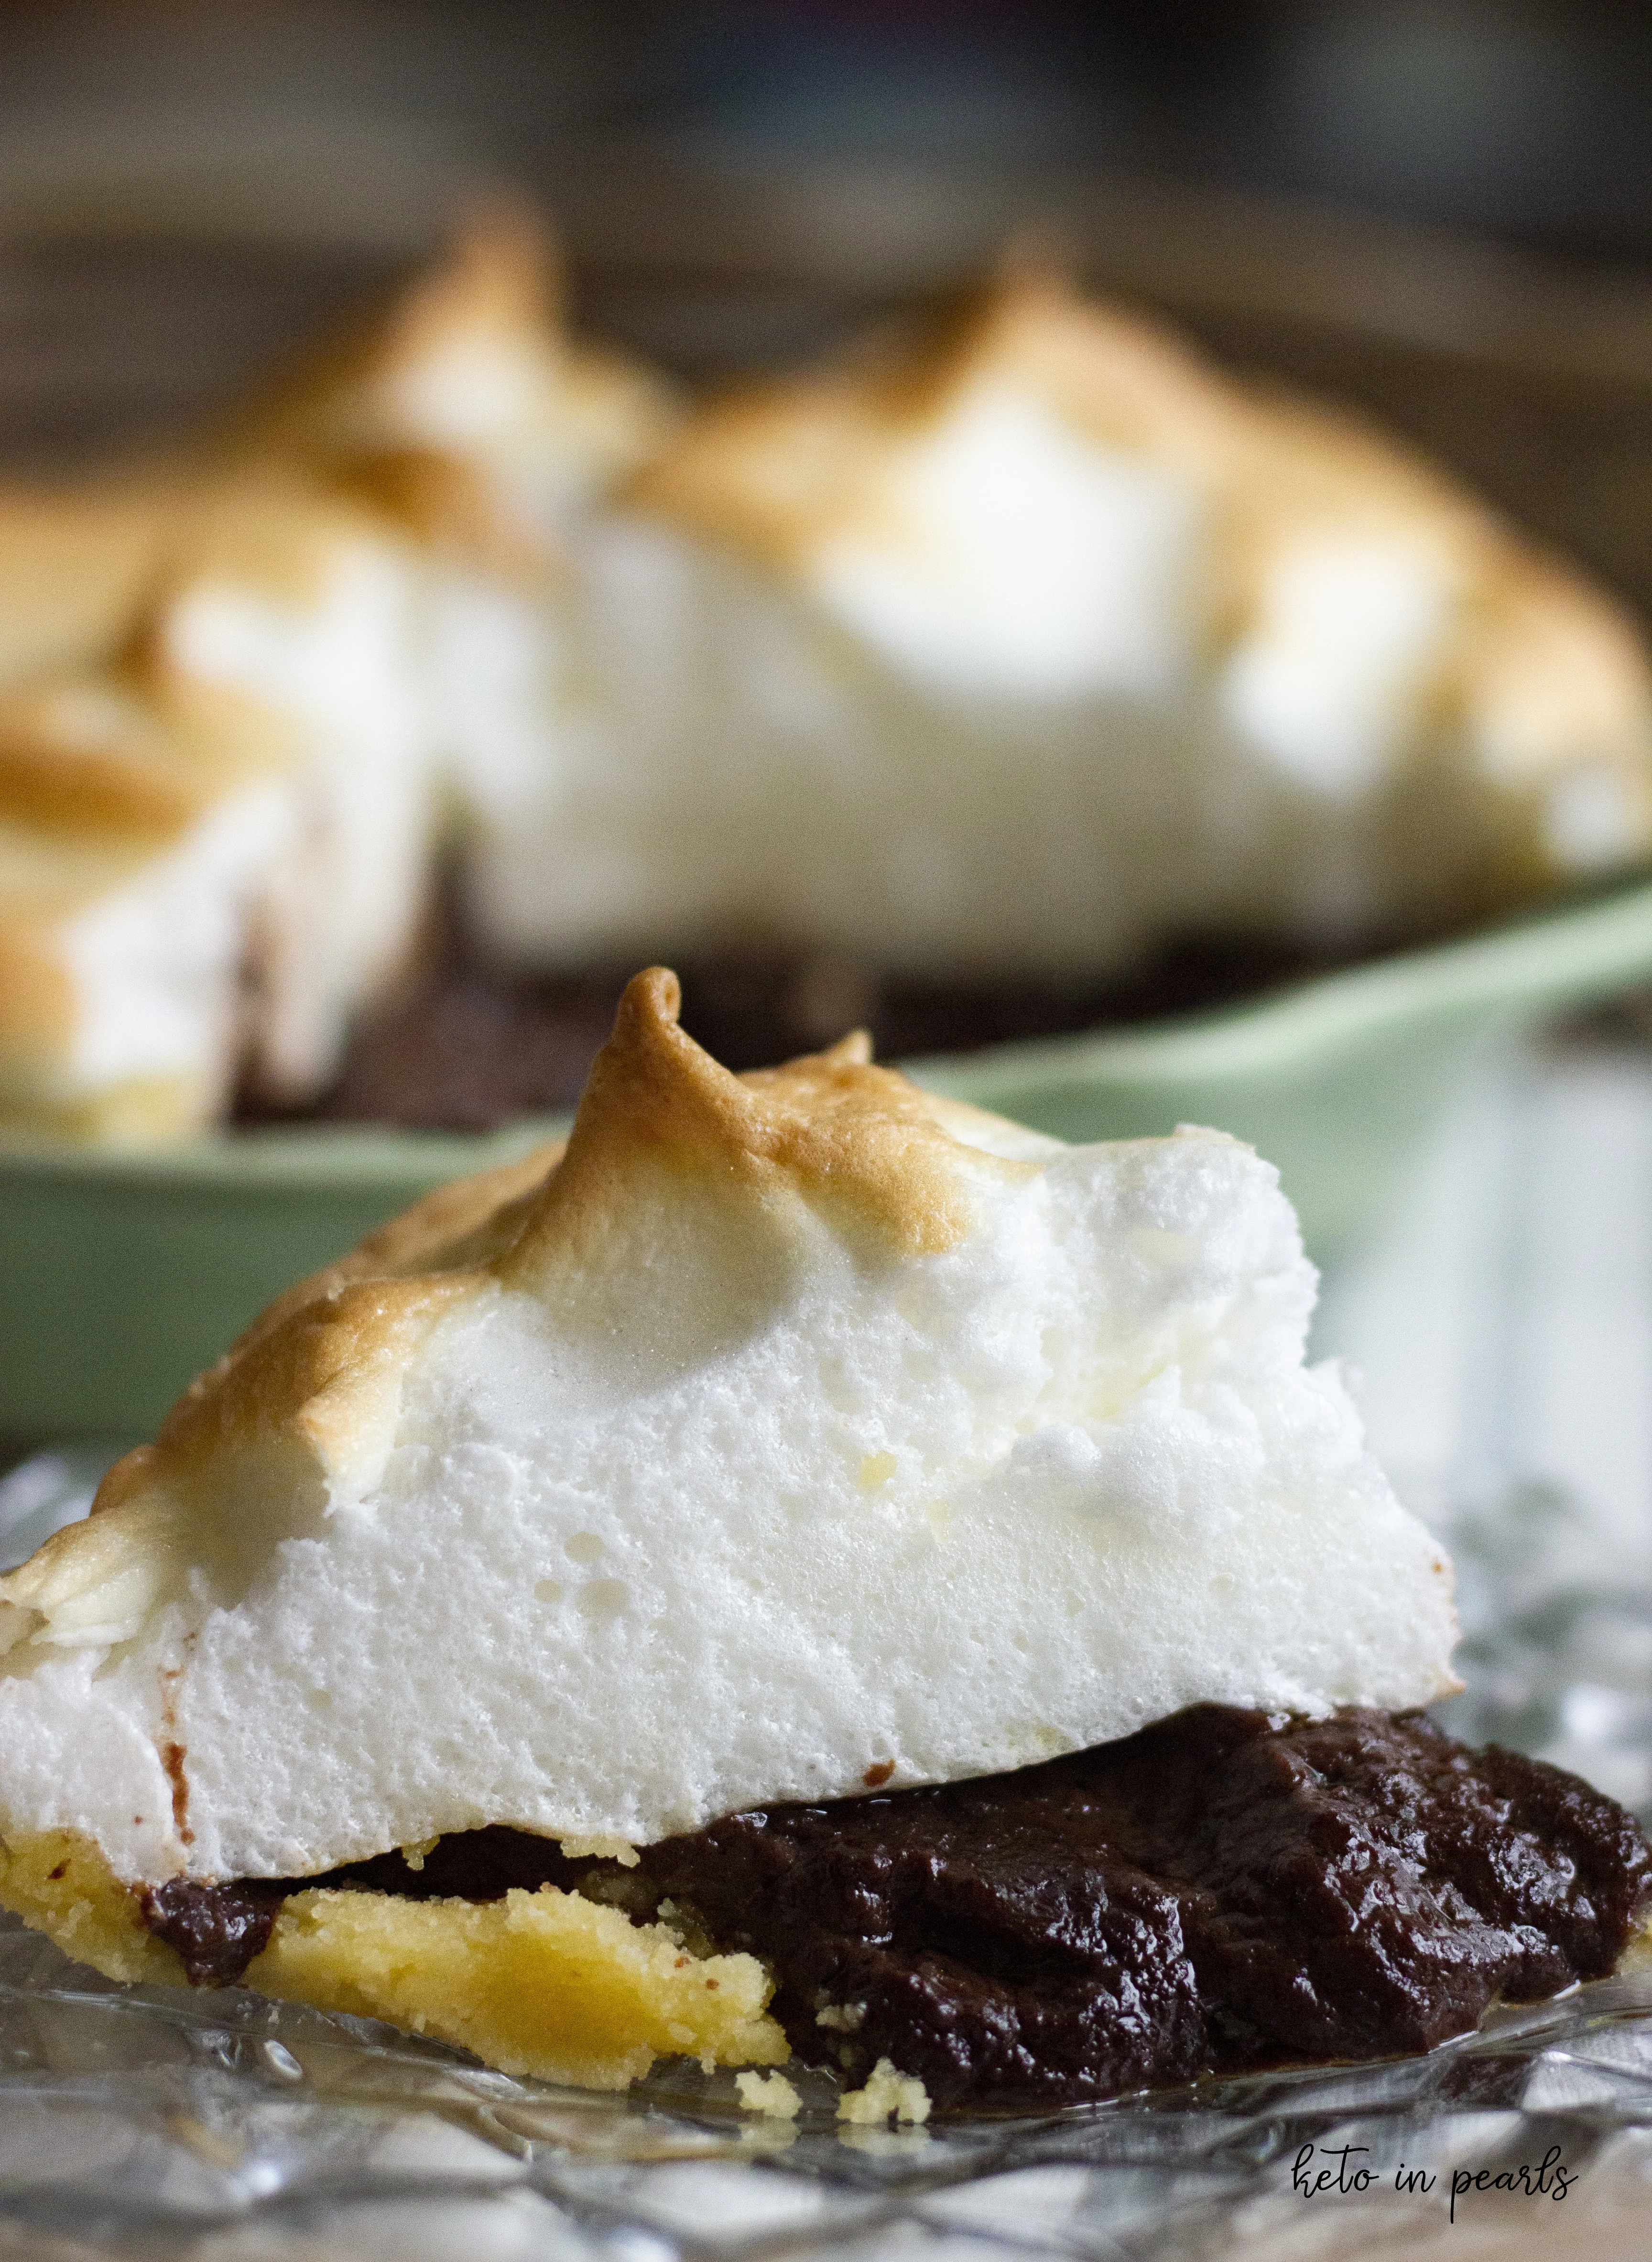 Keto chocolate pie with mile high meringue. Only 3 net carbs per serving and basic ingredients!